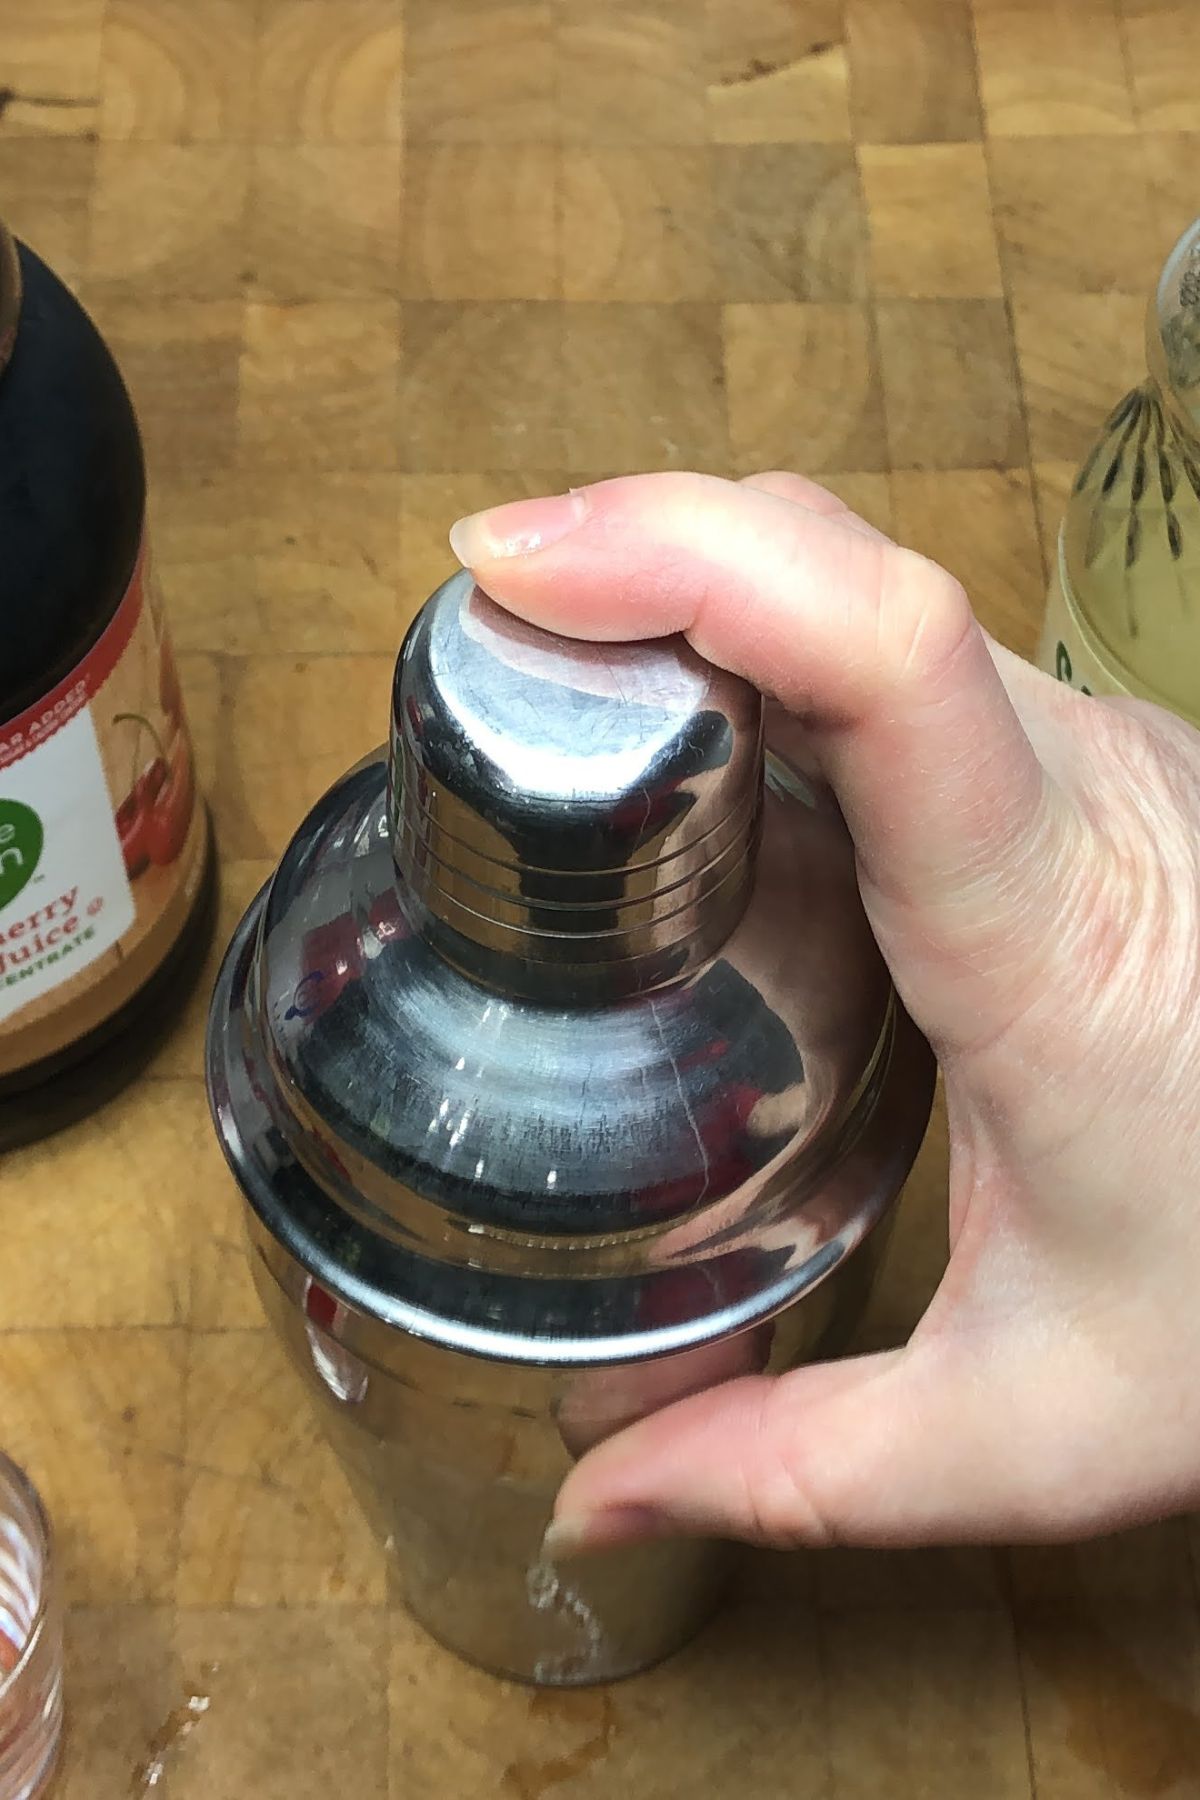 Covering the shaker with the lid.